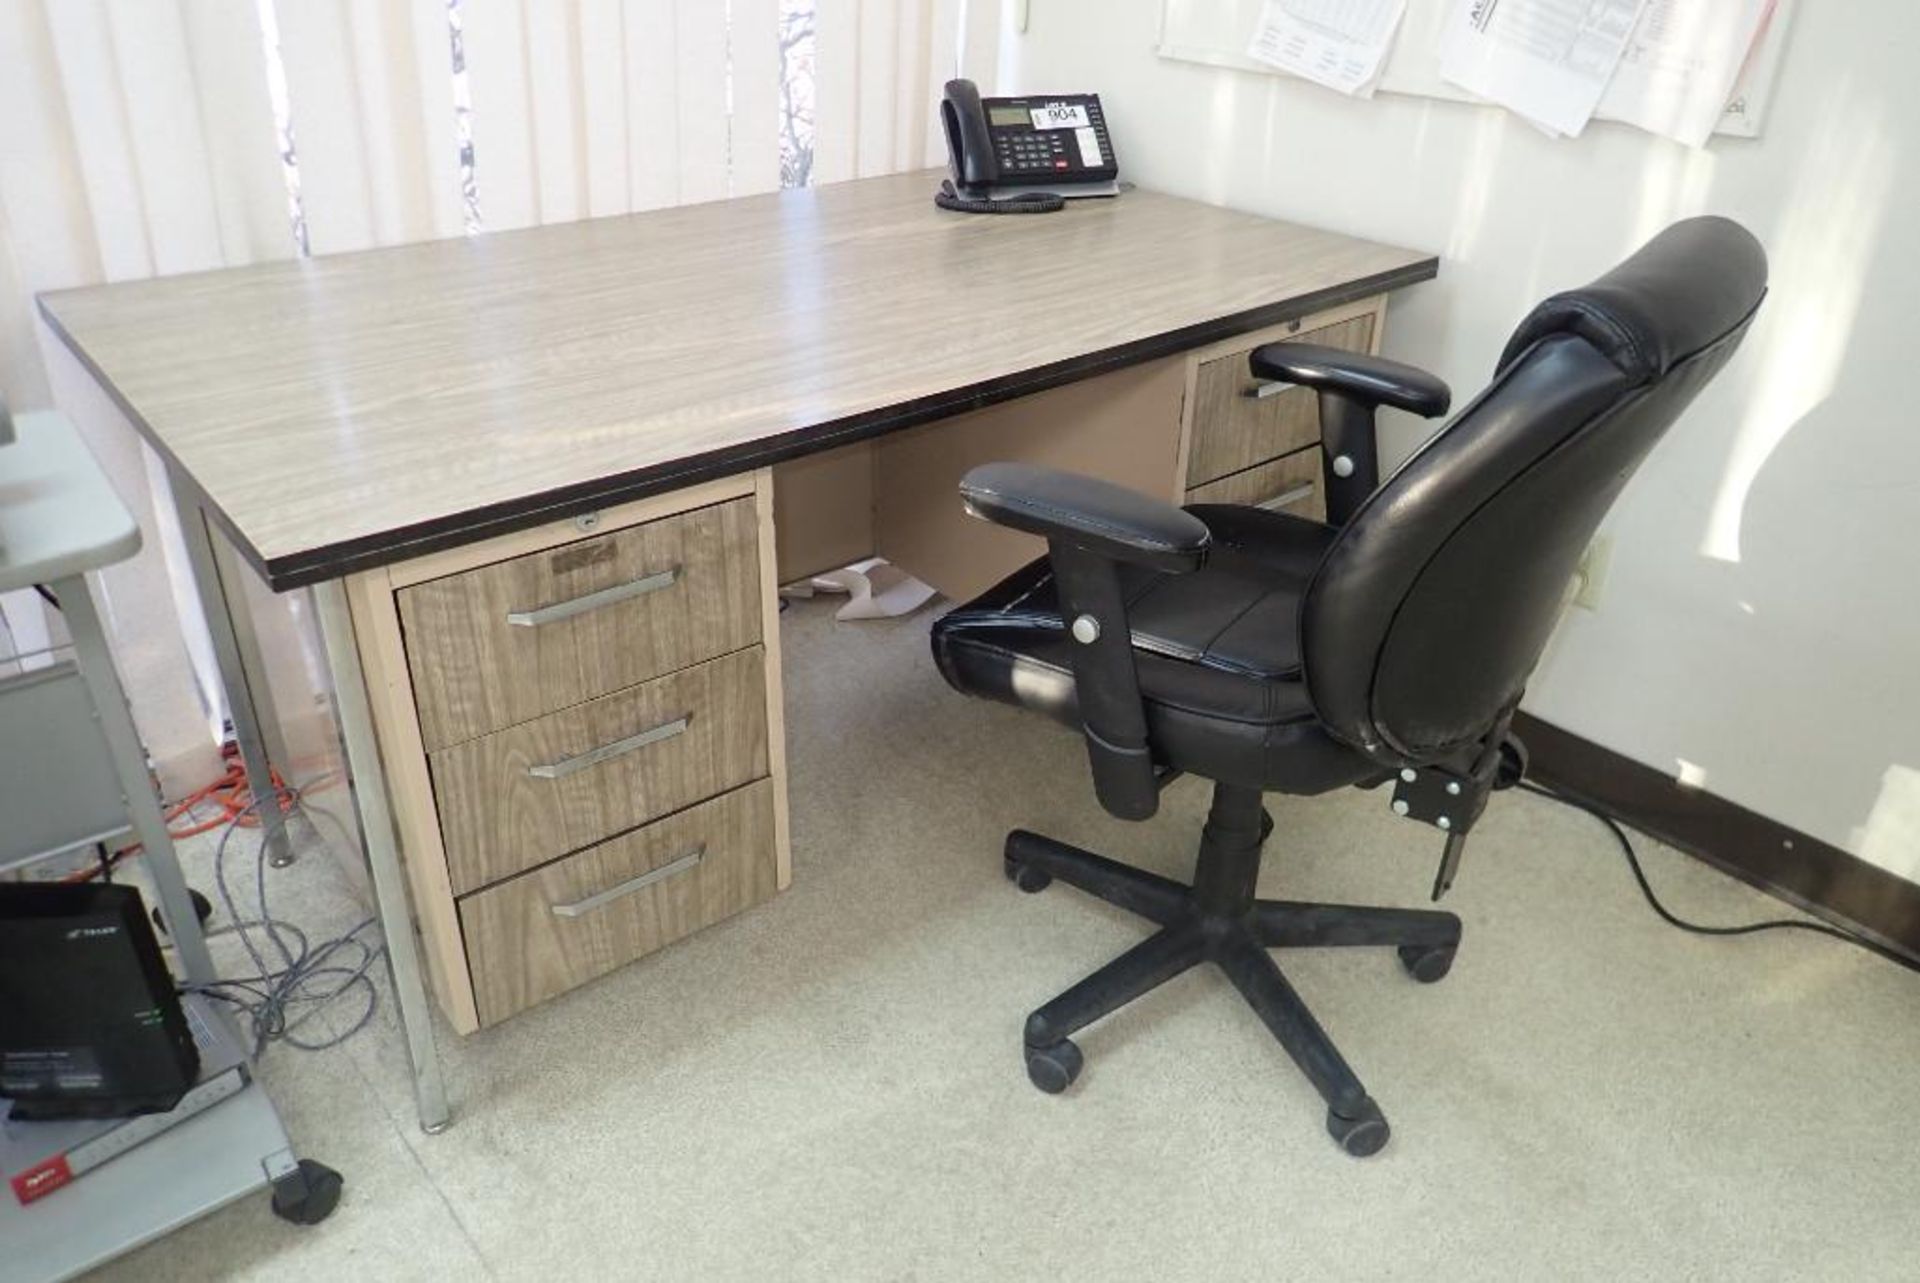 Lot of (3) Desks, L-Shaped Desk, (3) Chairs and (4) Filing Cabinets. - Image 2 of 4